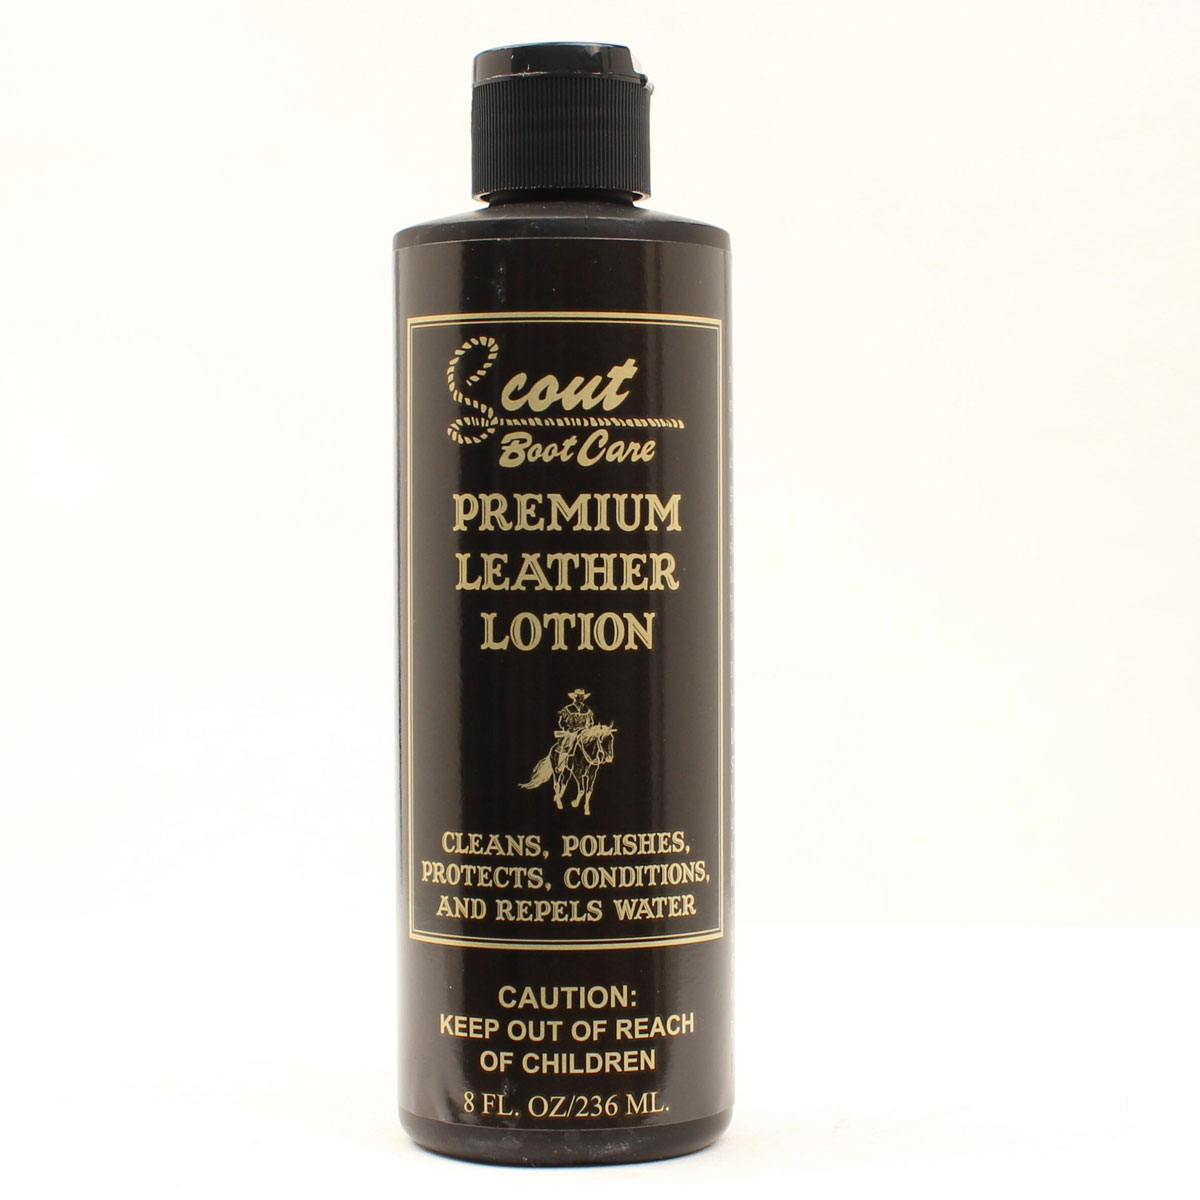 Scout Boot Care:  Premium Leather Lotion